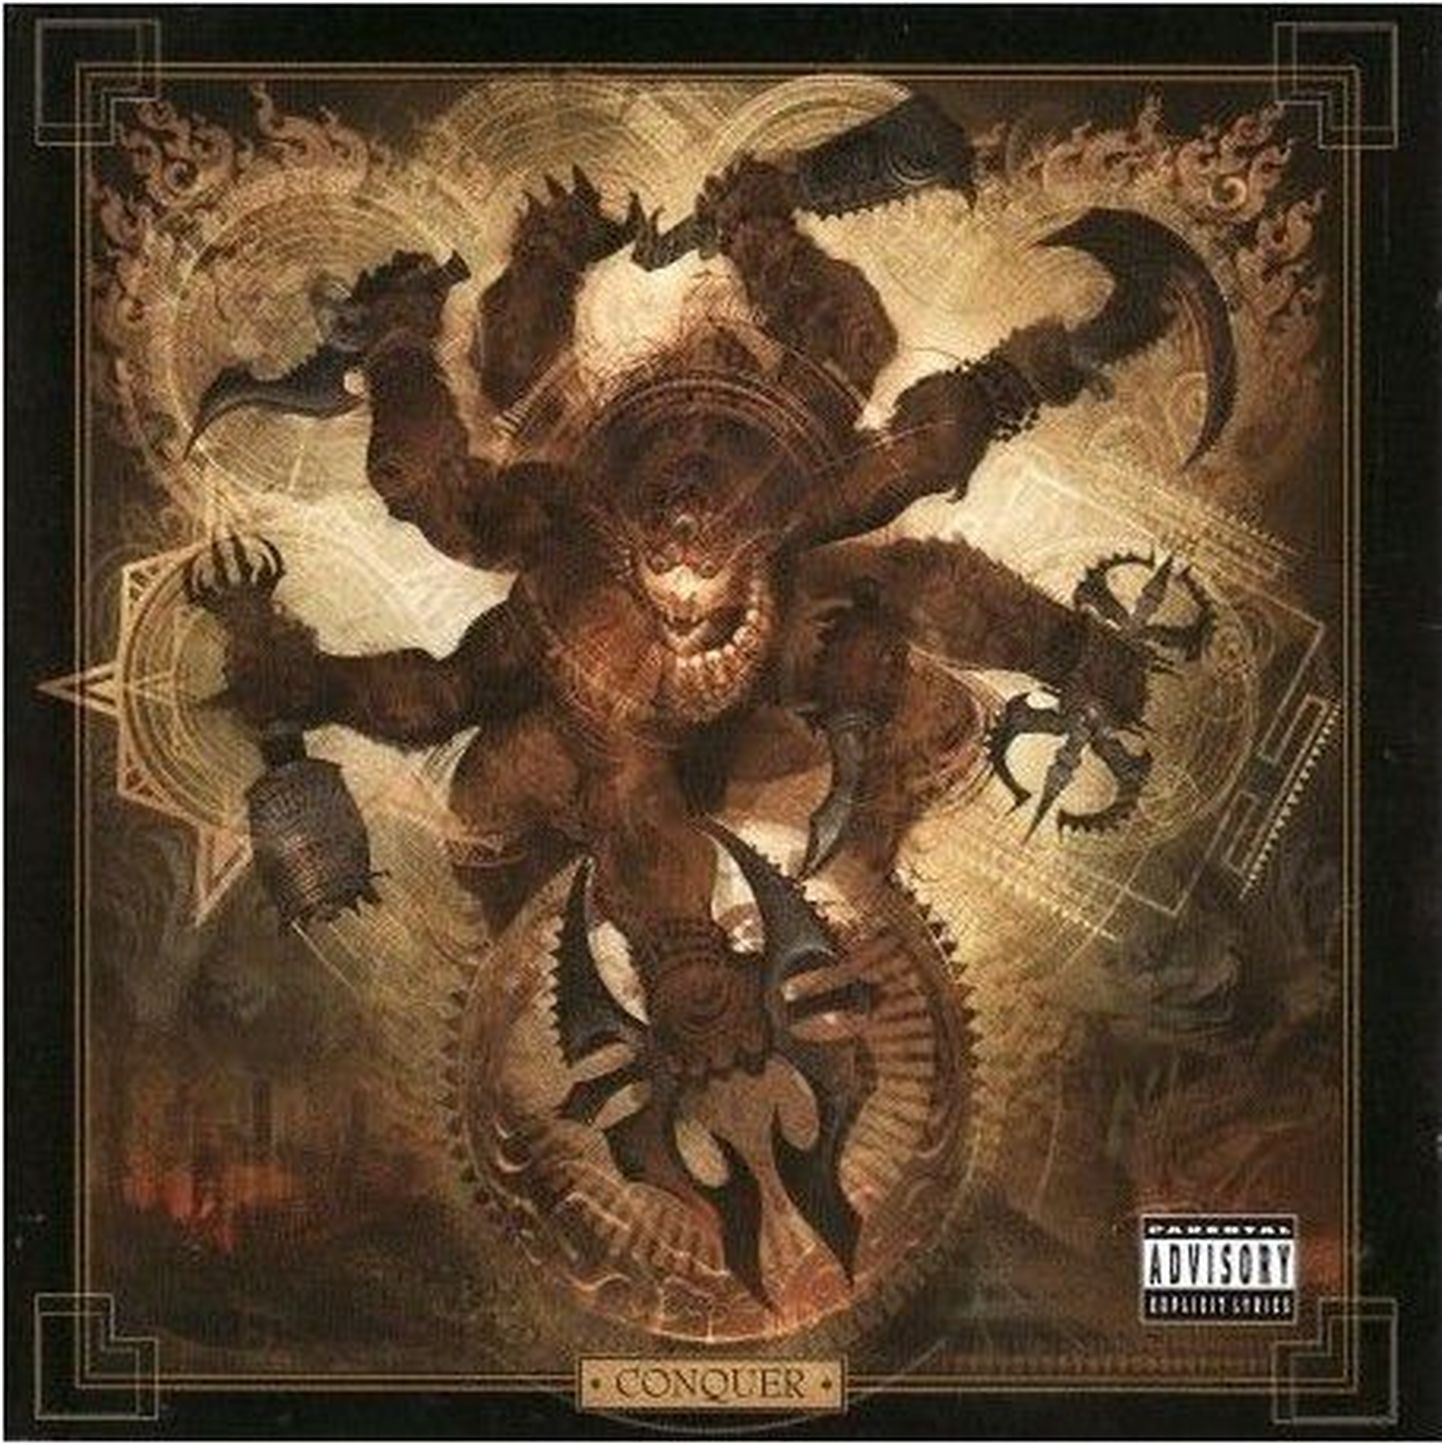 Soulfly "Conquer".